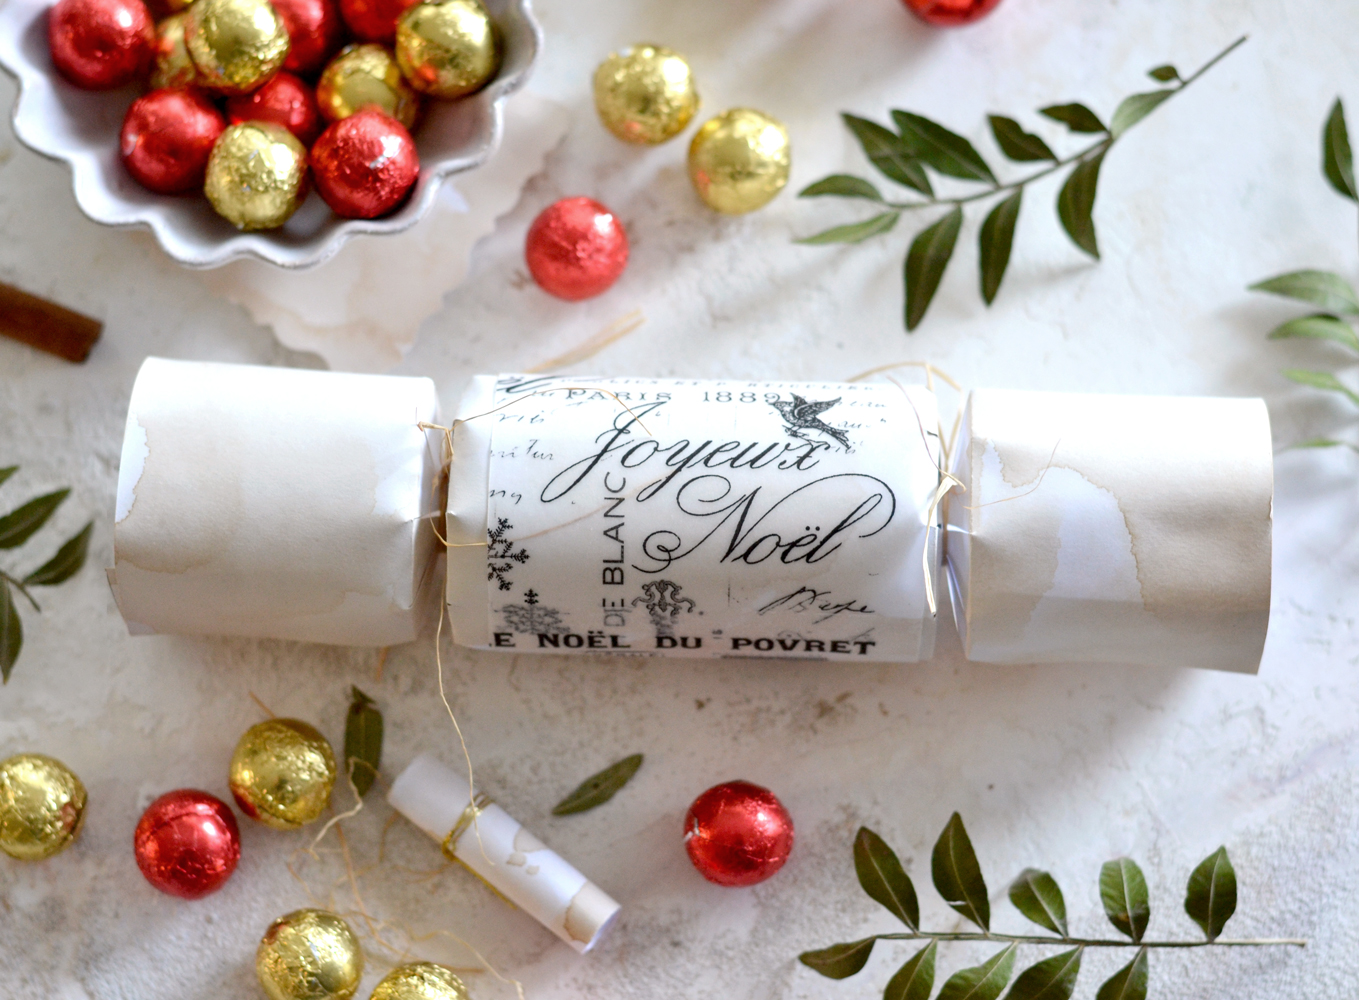 One 'Joyeux Noel' Christmas paper cracker placed on a table along with other seasonal elements